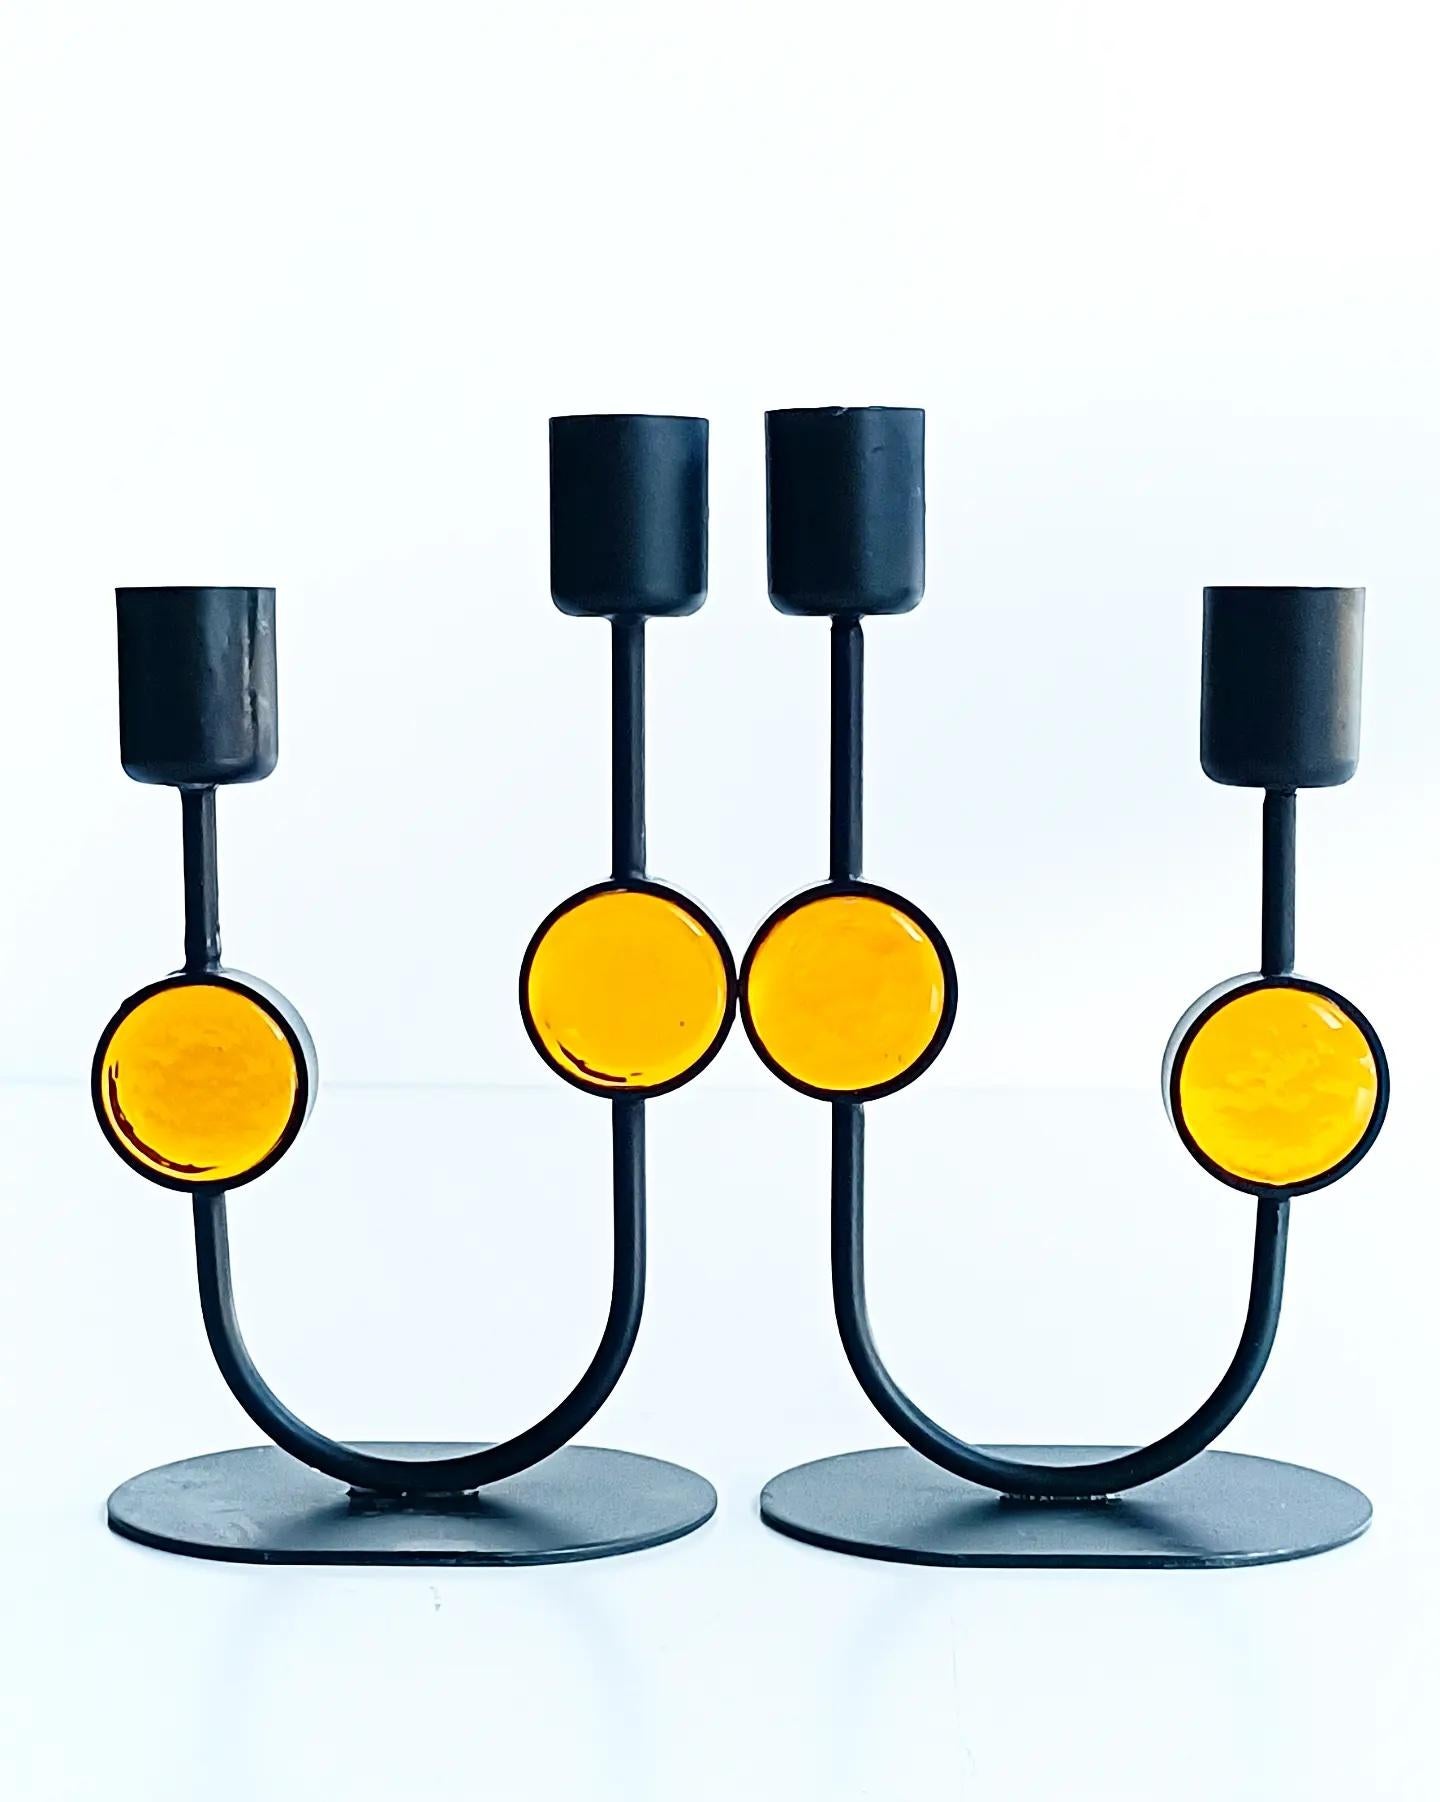 Beyond cool pair of candle holders designed by Gunnar Ander for Ystad-Metal. Handcrafted in Sweden during the 1950s, these candle holders are a testament to Ander's unparalleled creativity and craftsmanship.

Made from durable metal and vibrant